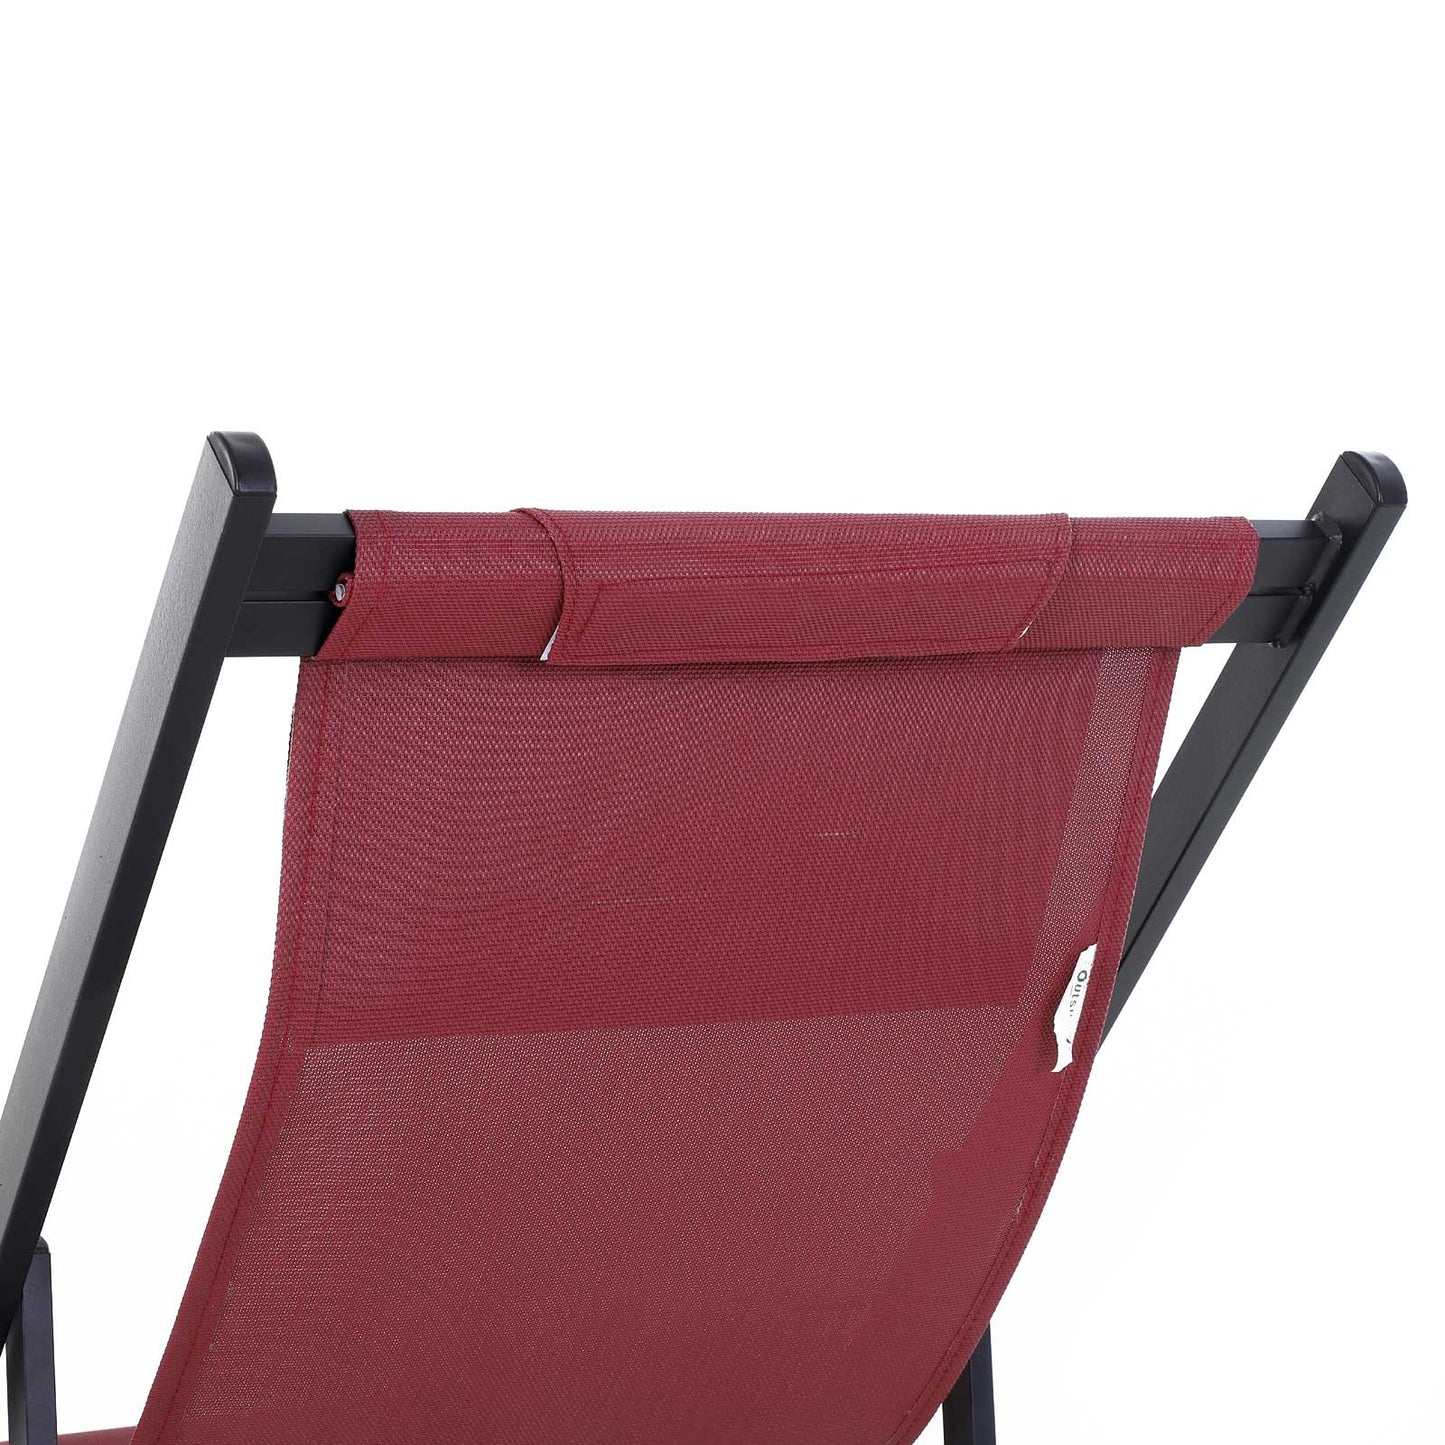 Outsunny Garden Deck Chairs, Set of 2, Folding, Portable for Beach/Patio, Durable, Red